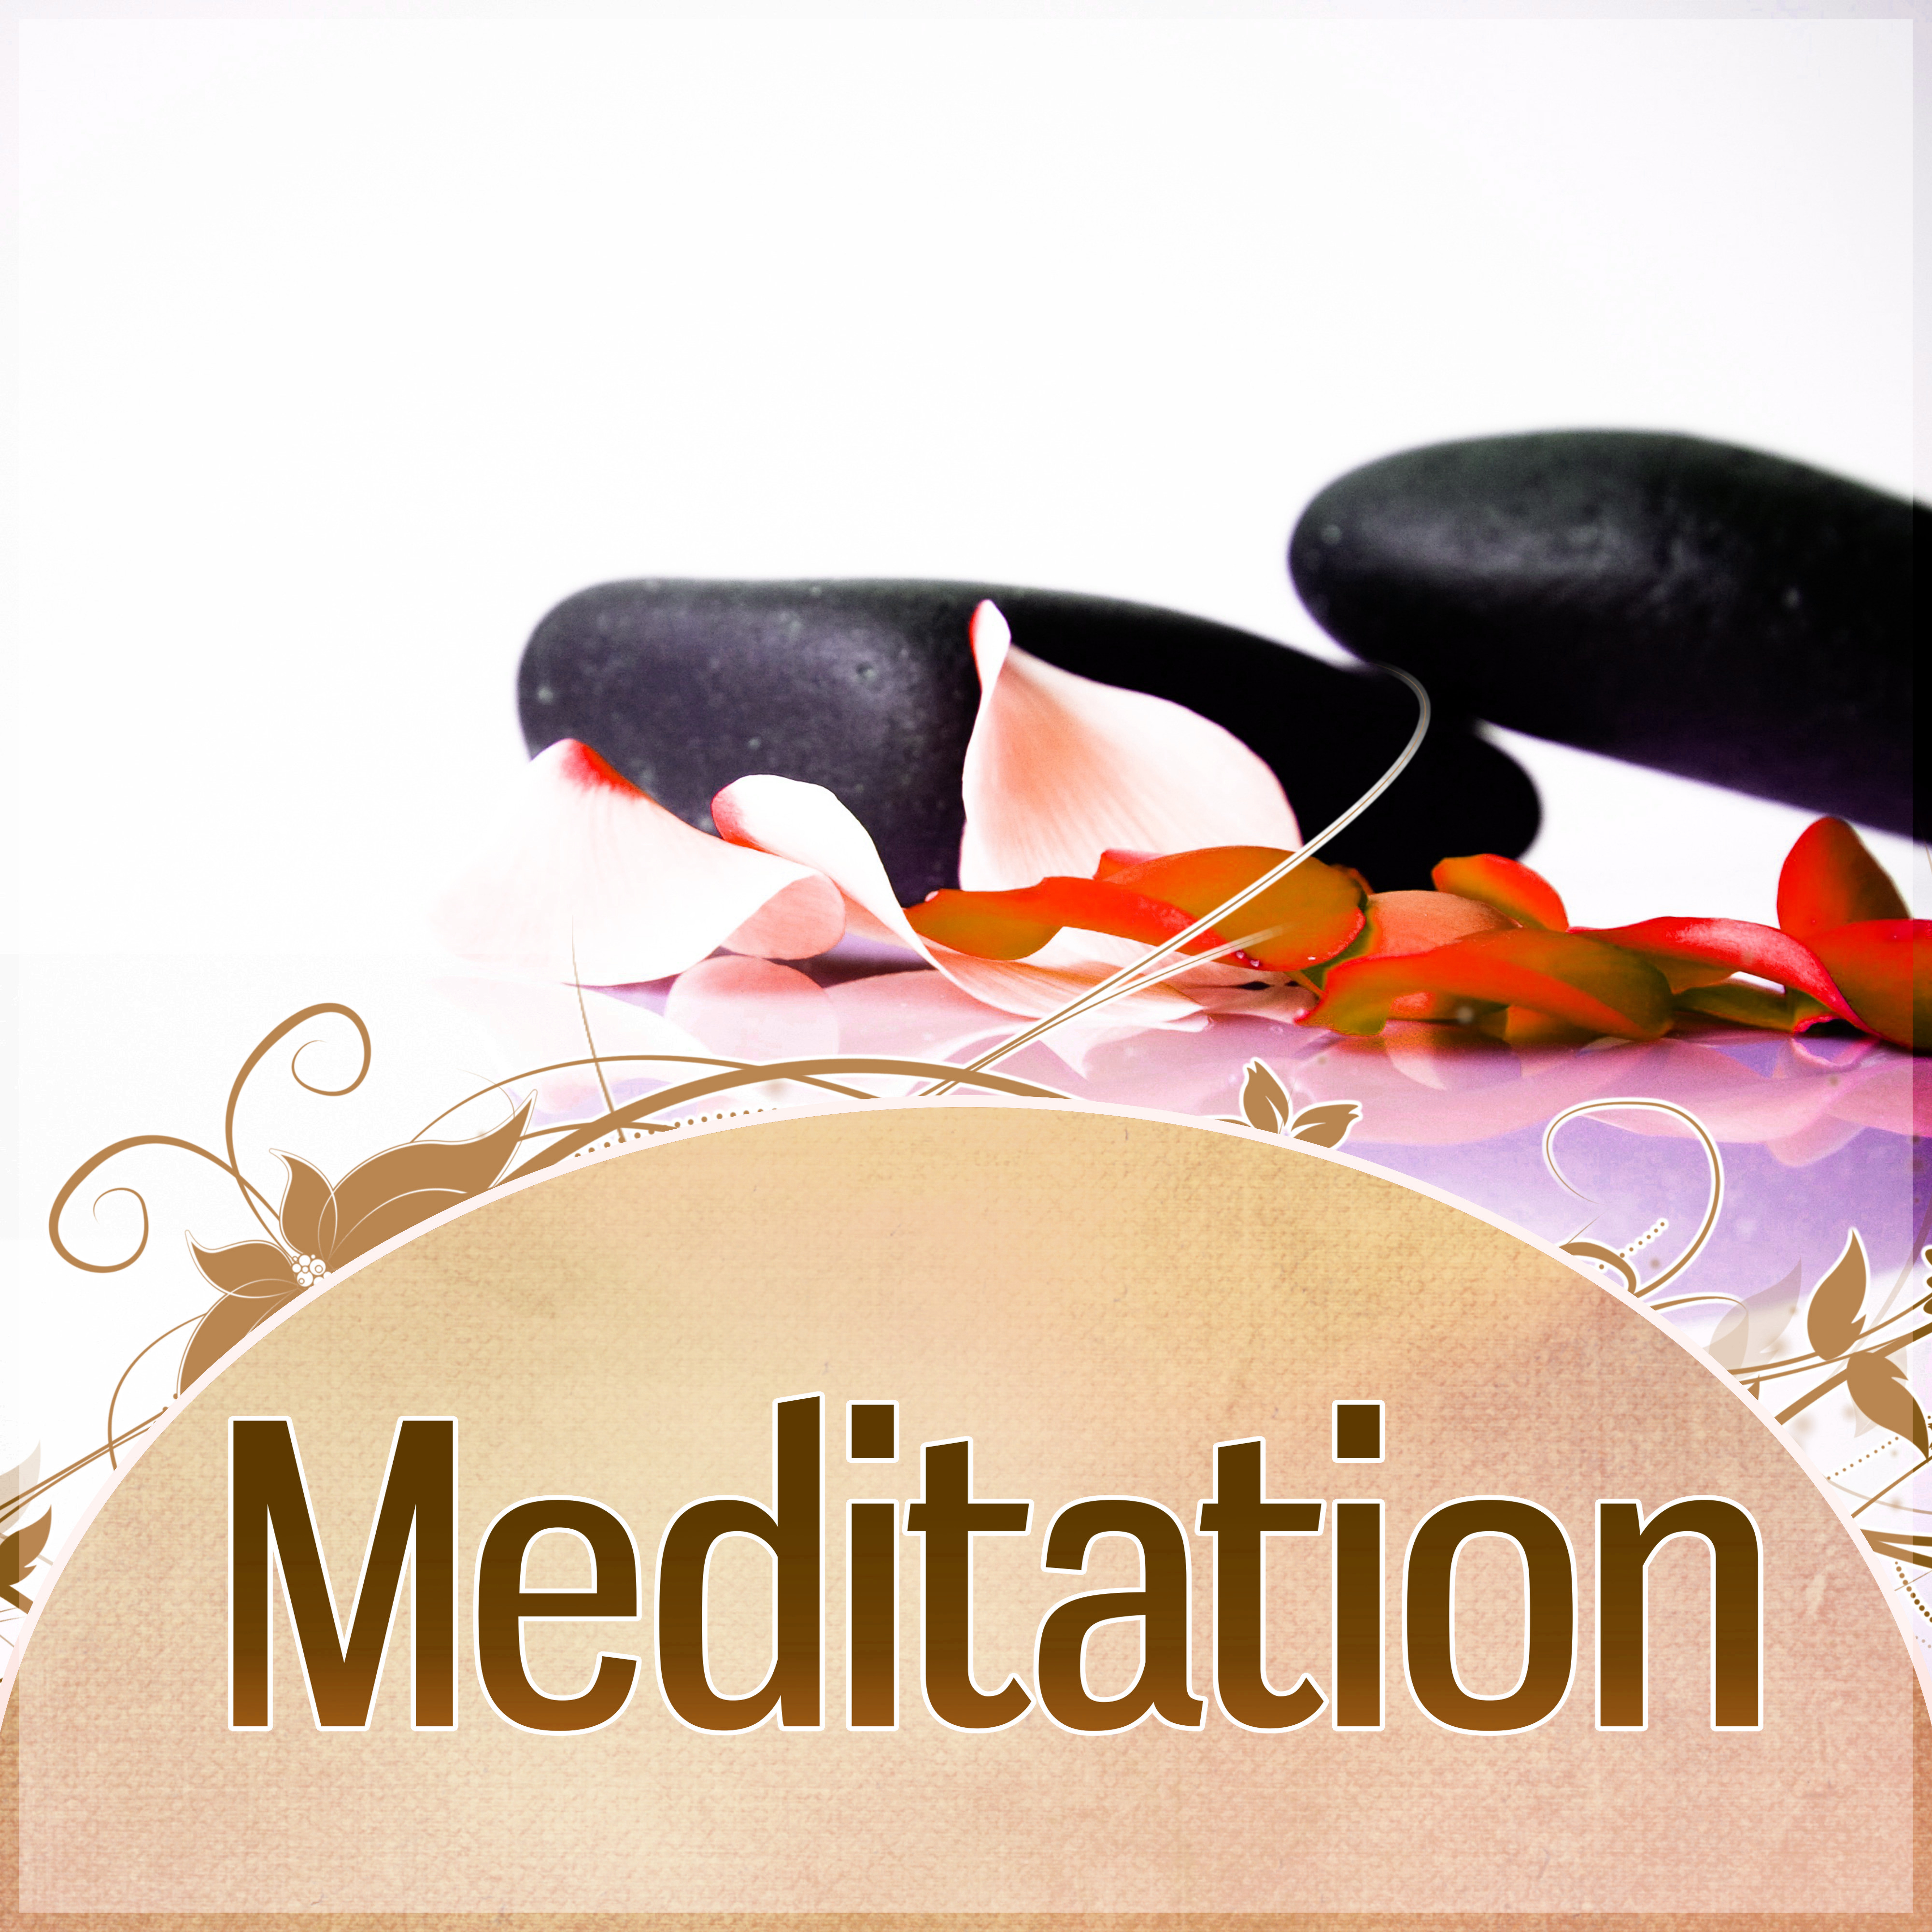 Meditation - Peaceful Music with the Sounds of Nature, Deep Zen Meditation & Wellbeing, Mindfulness Meditation Spiritual Healing, Chakra Meditation Balancing, Mindful